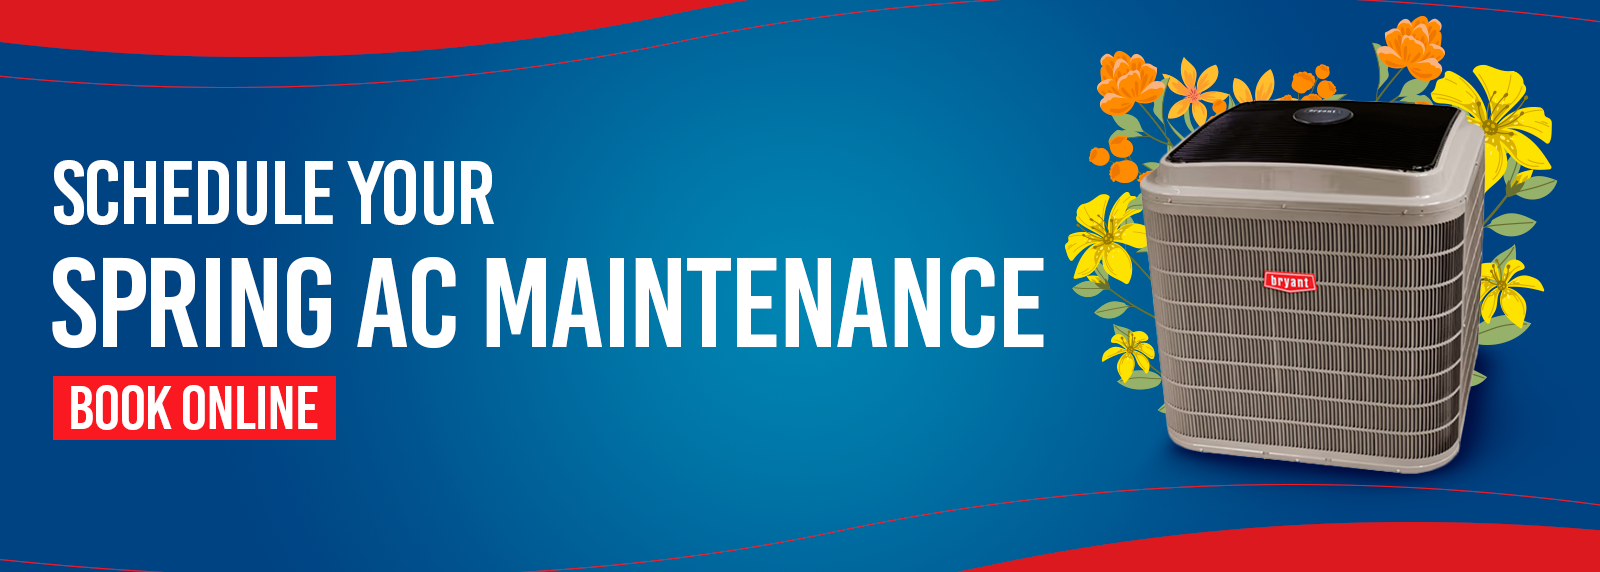 Schedule your Spring AC Maintenance